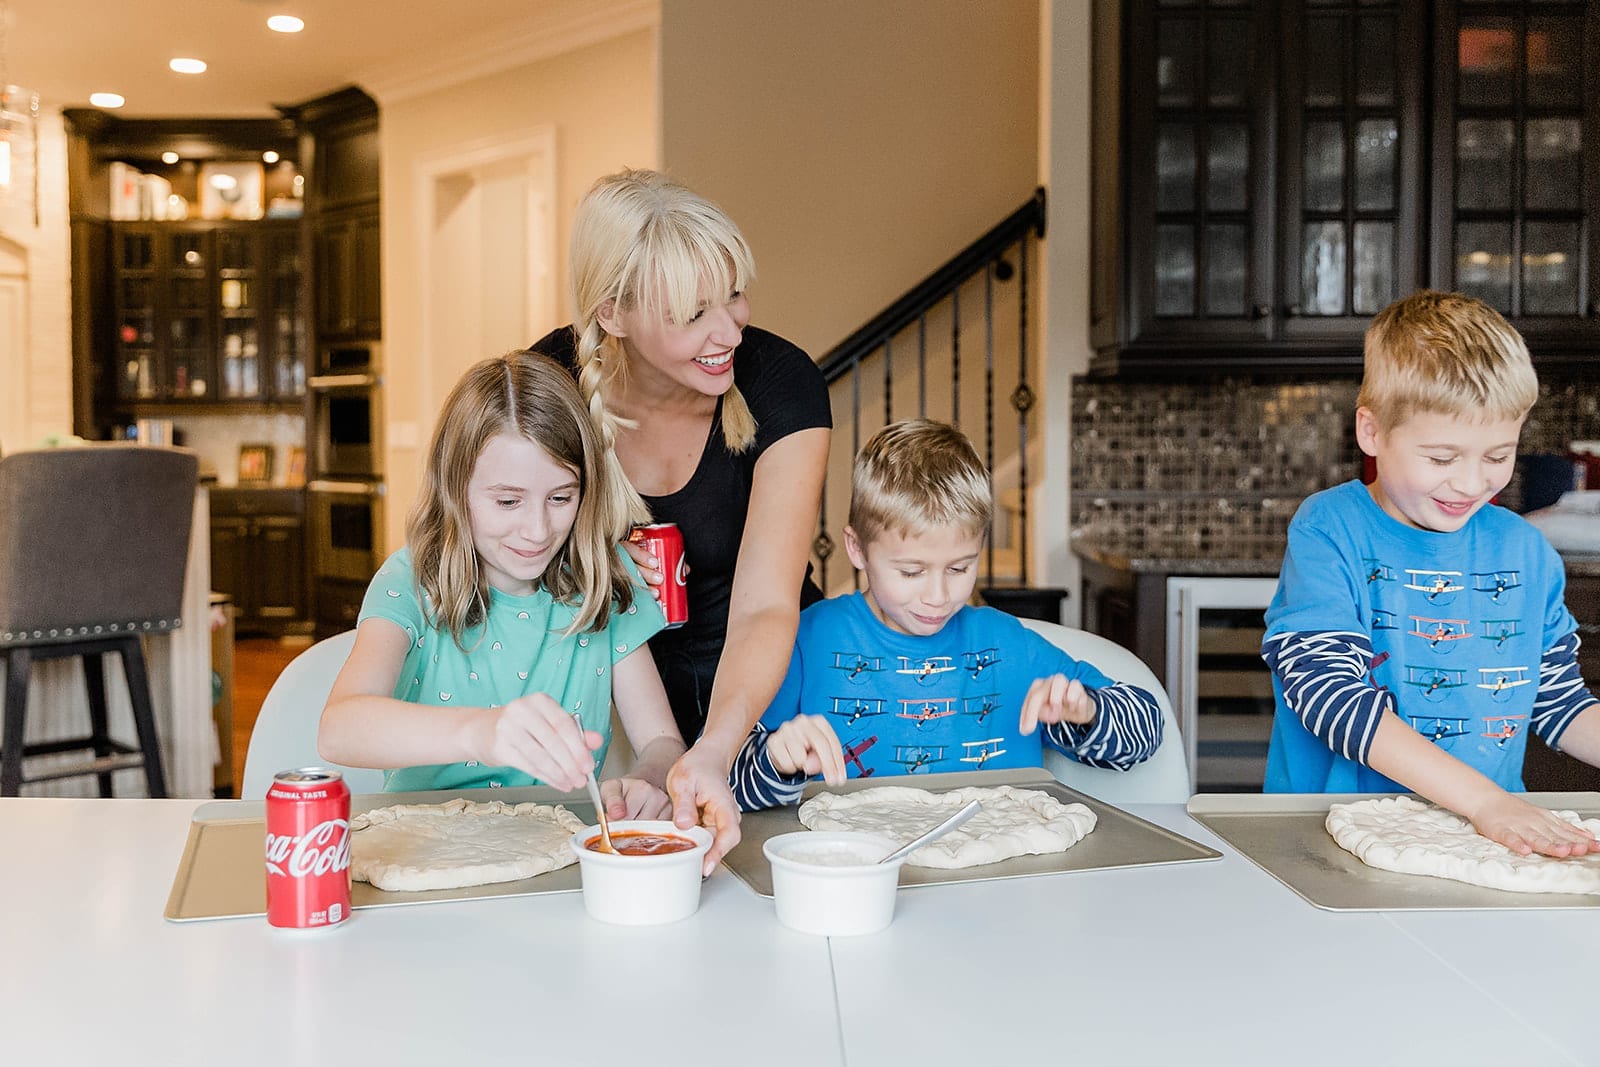 Easy DIY Pizza with Publix Pizza Dough. Have an easy family dinner with Publix pizza dough and Coke. My kids love making their own pizza and this dough is so yummy!